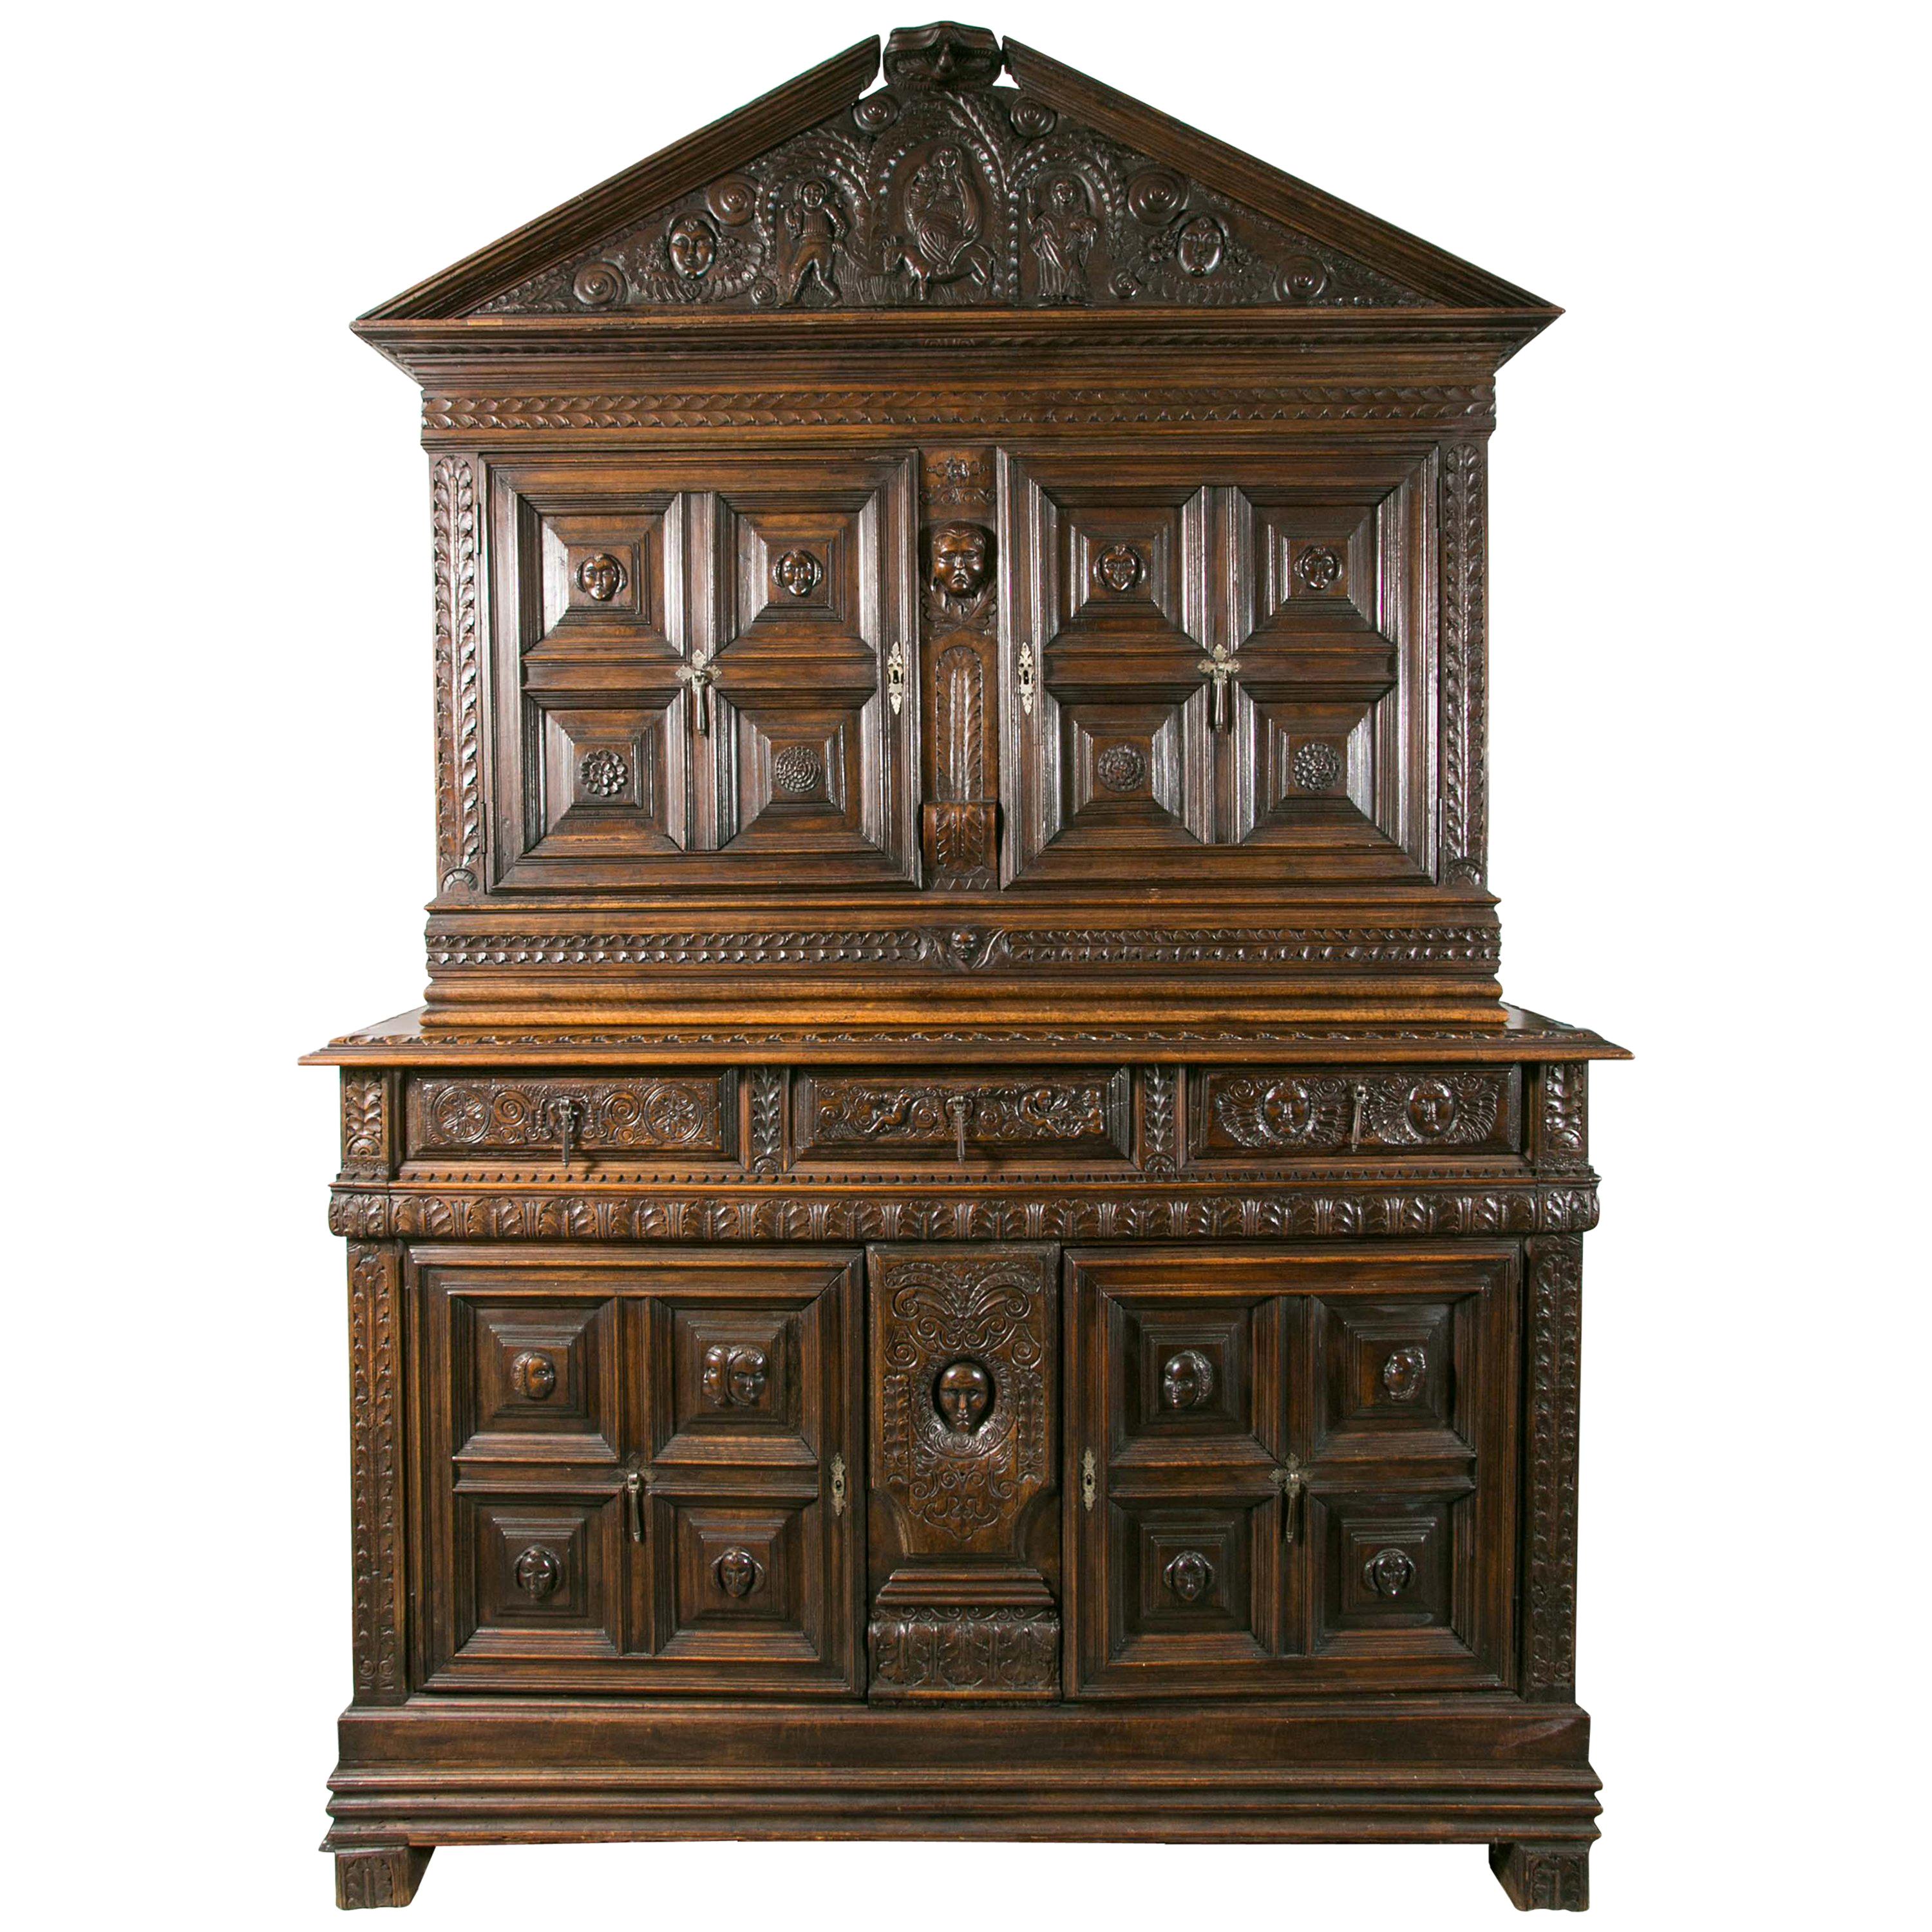 17th Century Furniture Important Supposedly from Northern Italy, Antique Art. For Sale